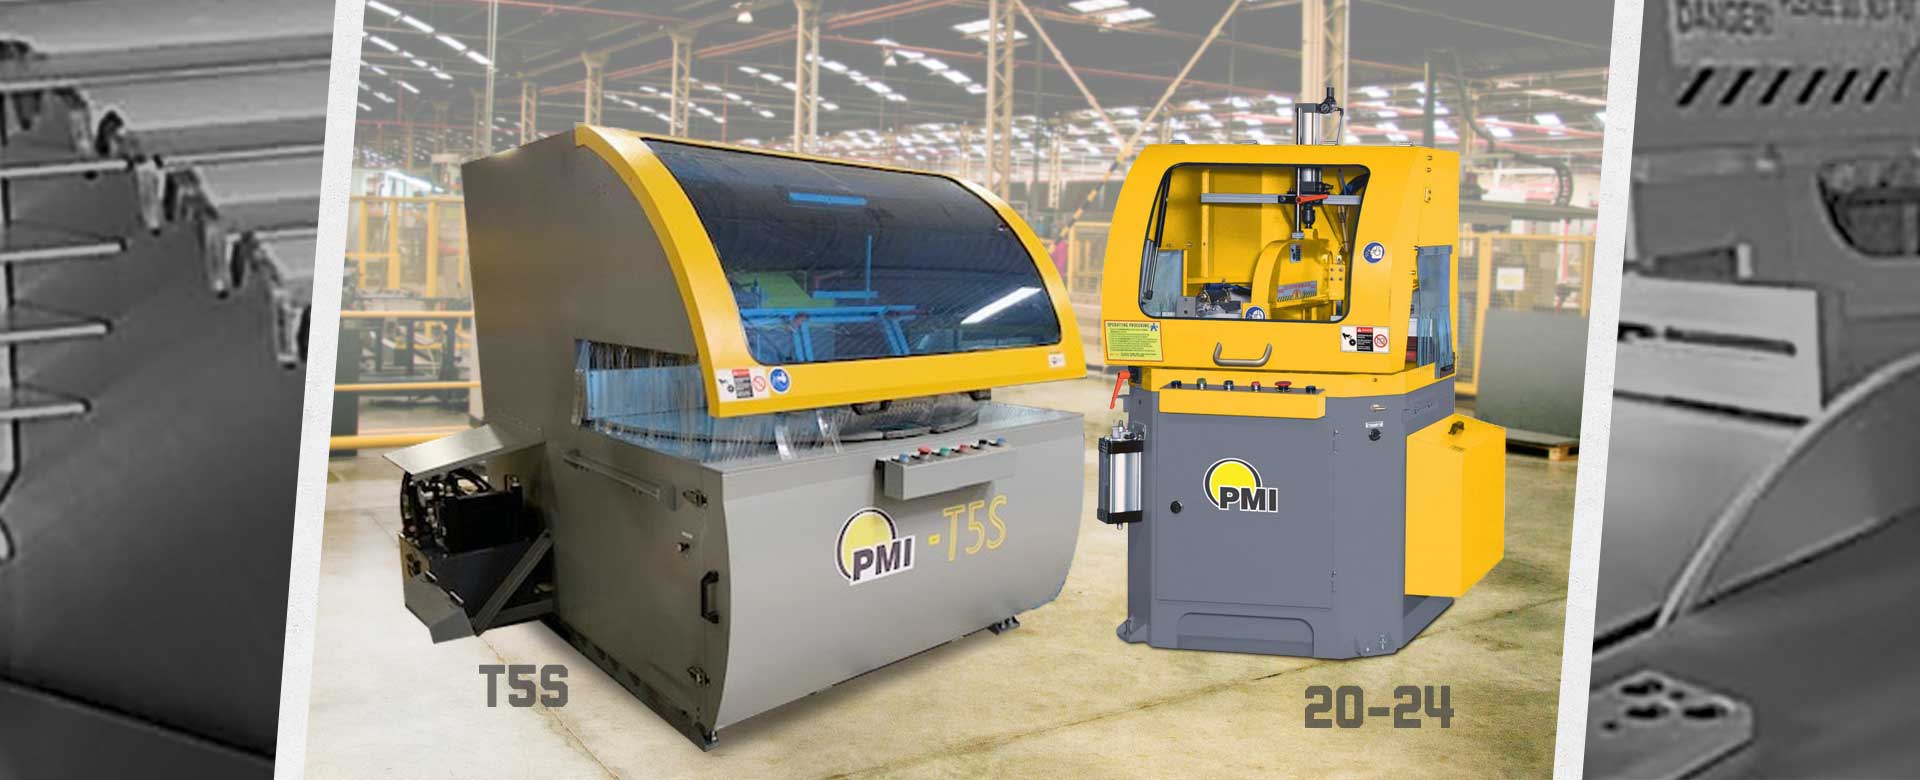 Gulf States Saw & Machine Co. offers Semi-automatic Circular Upcut Saws such as the PMI T5S and 20-24, from PMI in multiple models and configurations.